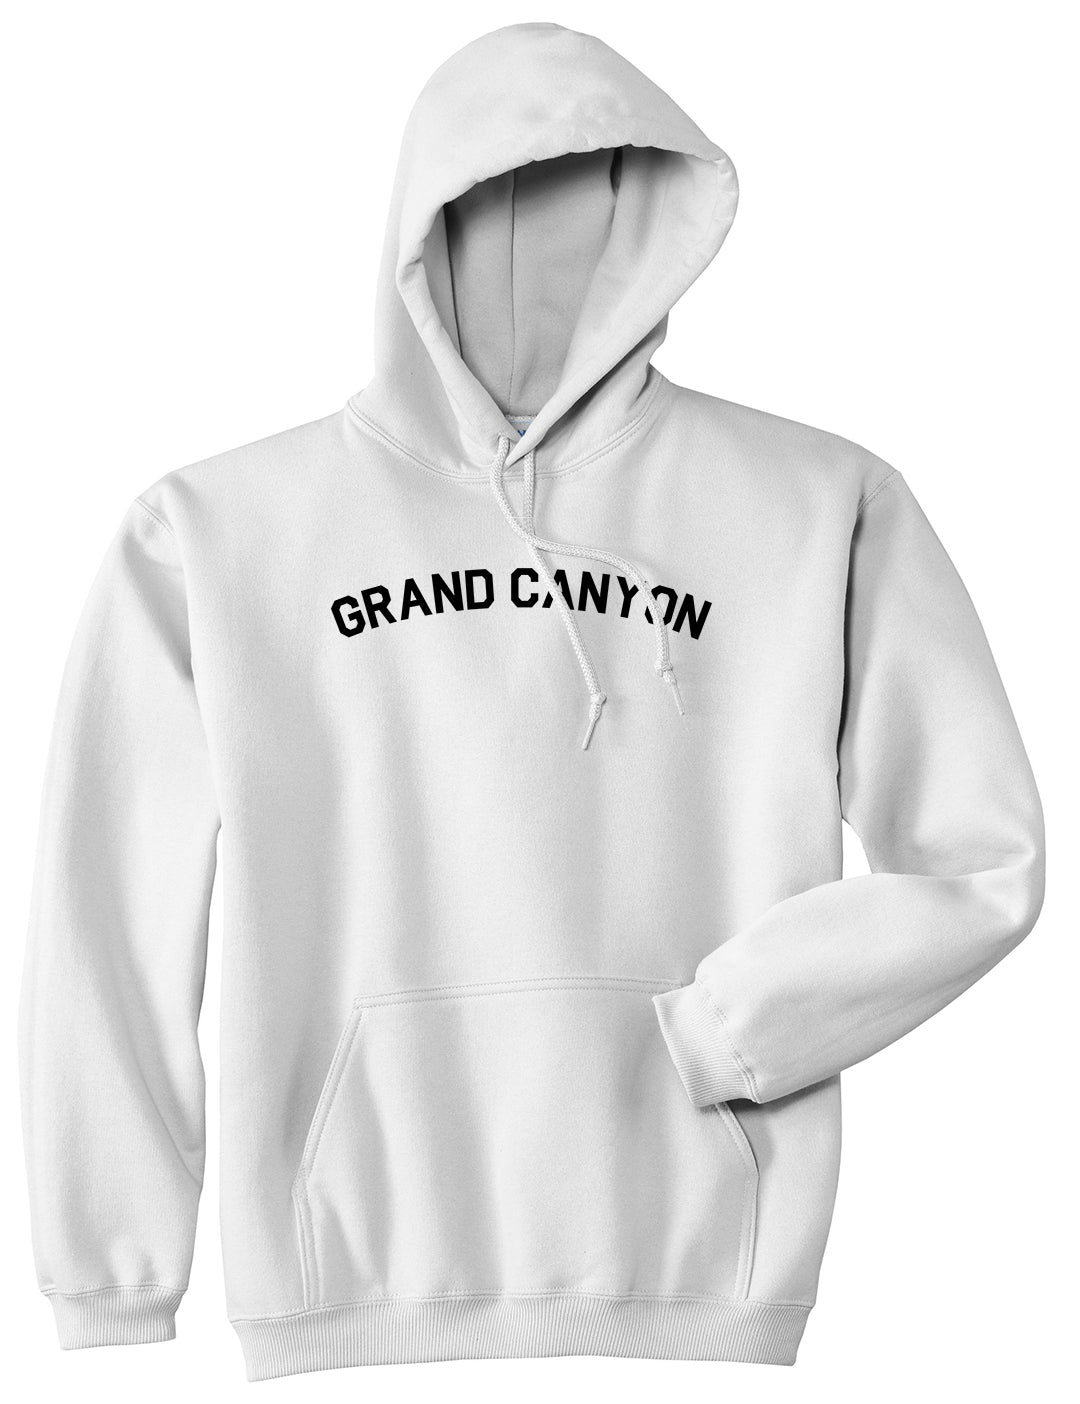 Grand Canyon Mens White Pullover Hoodie by KINGS OF NY